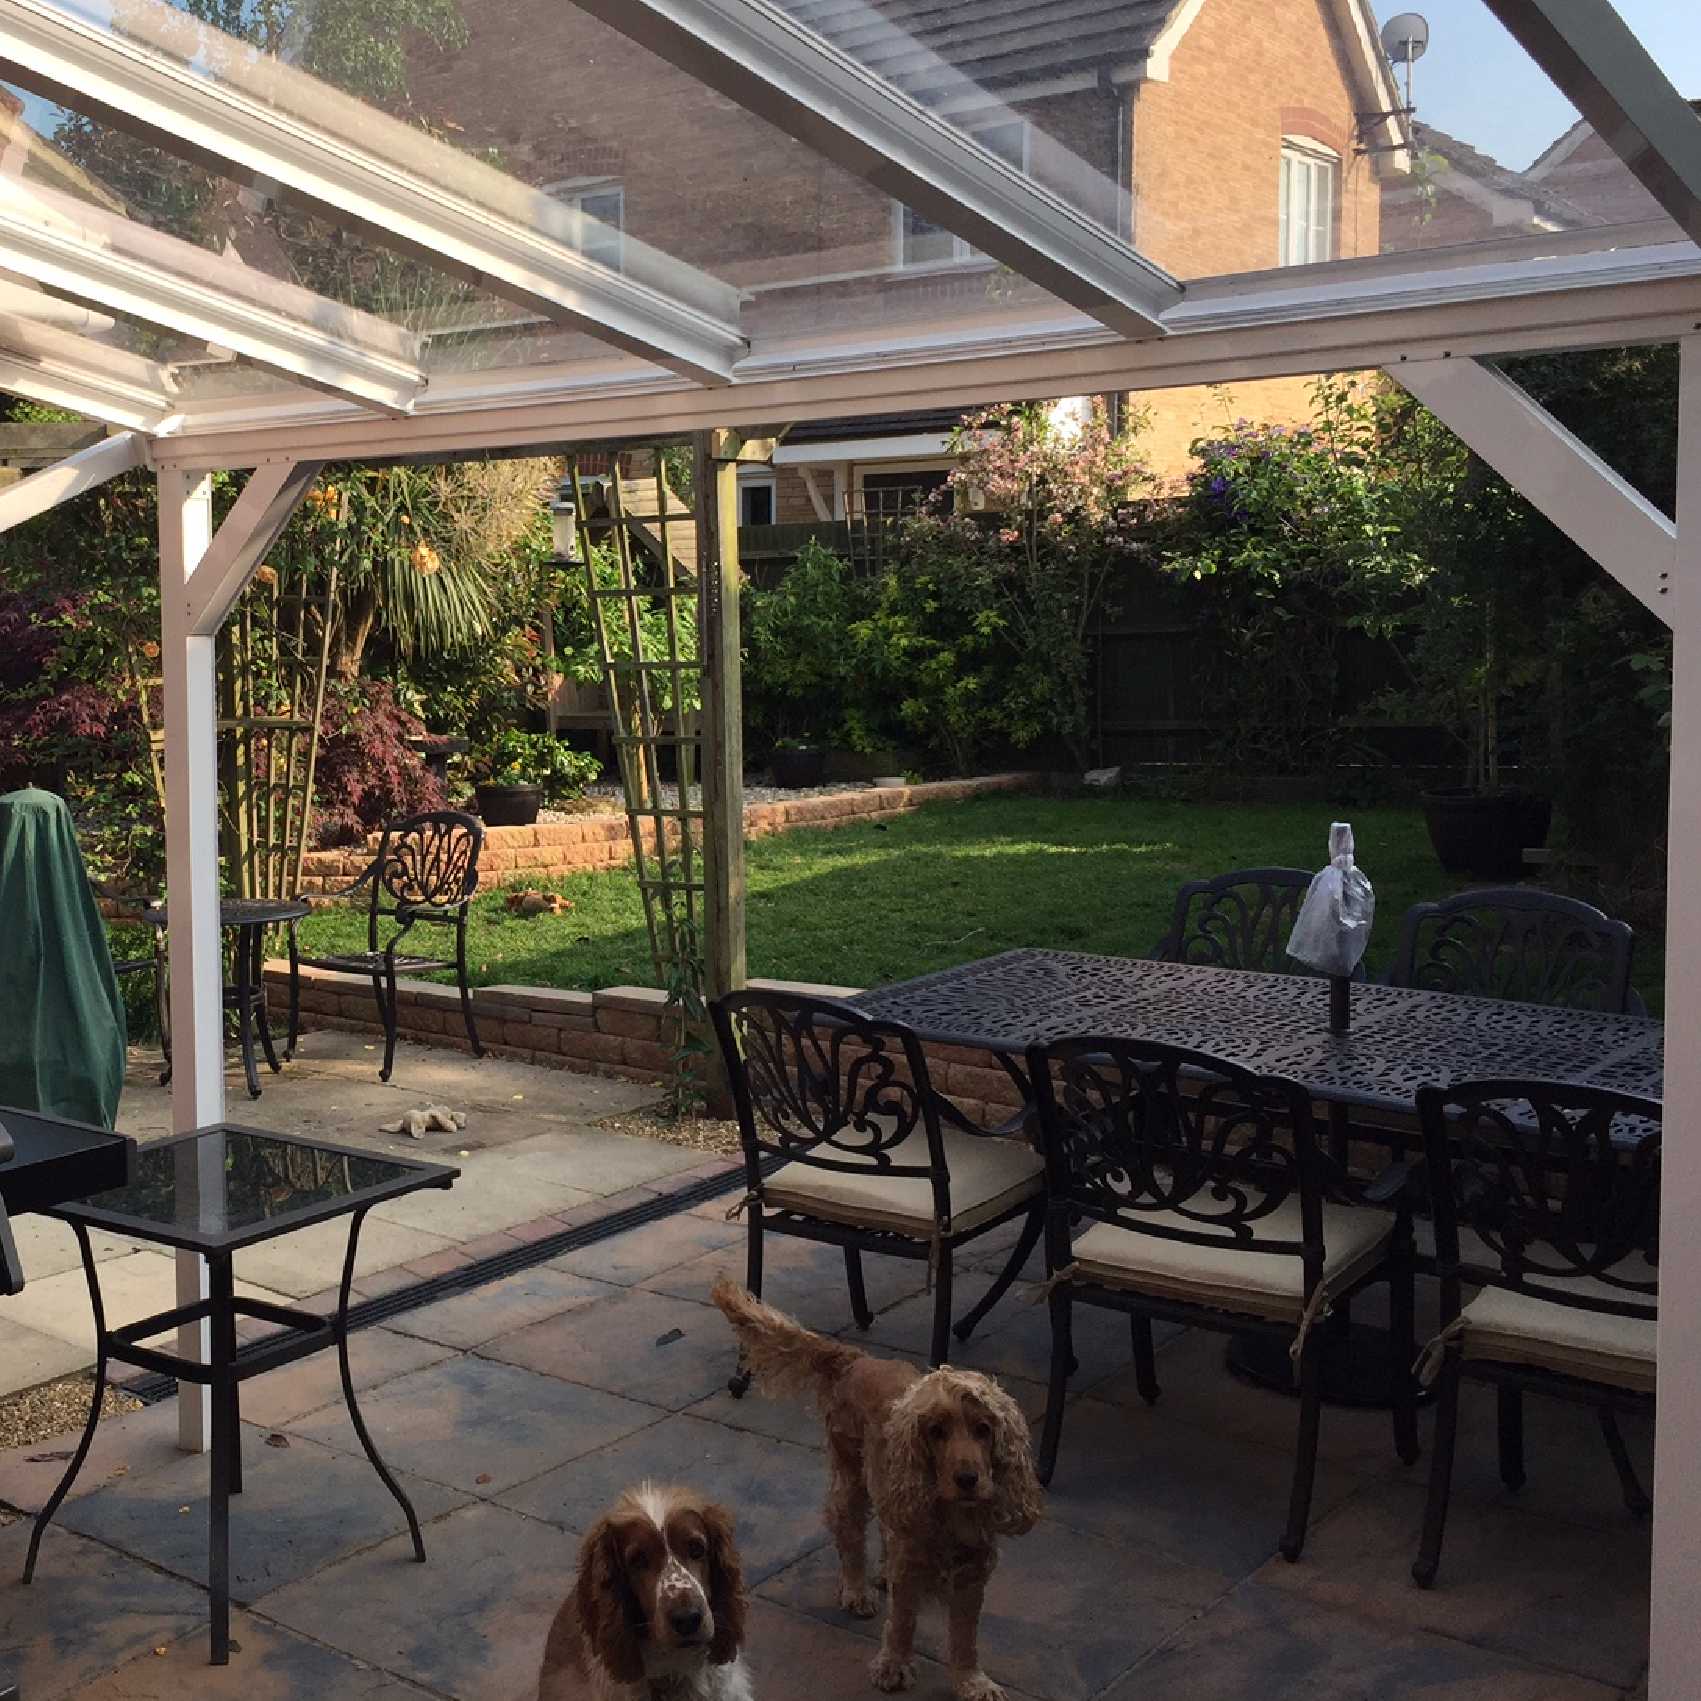 Affordable Omega Smart Lean-To Canopy, White UNGLAZED for 6mm Glazing - 4.9m (W) x 2.0m (P), (3) Supporting Posts